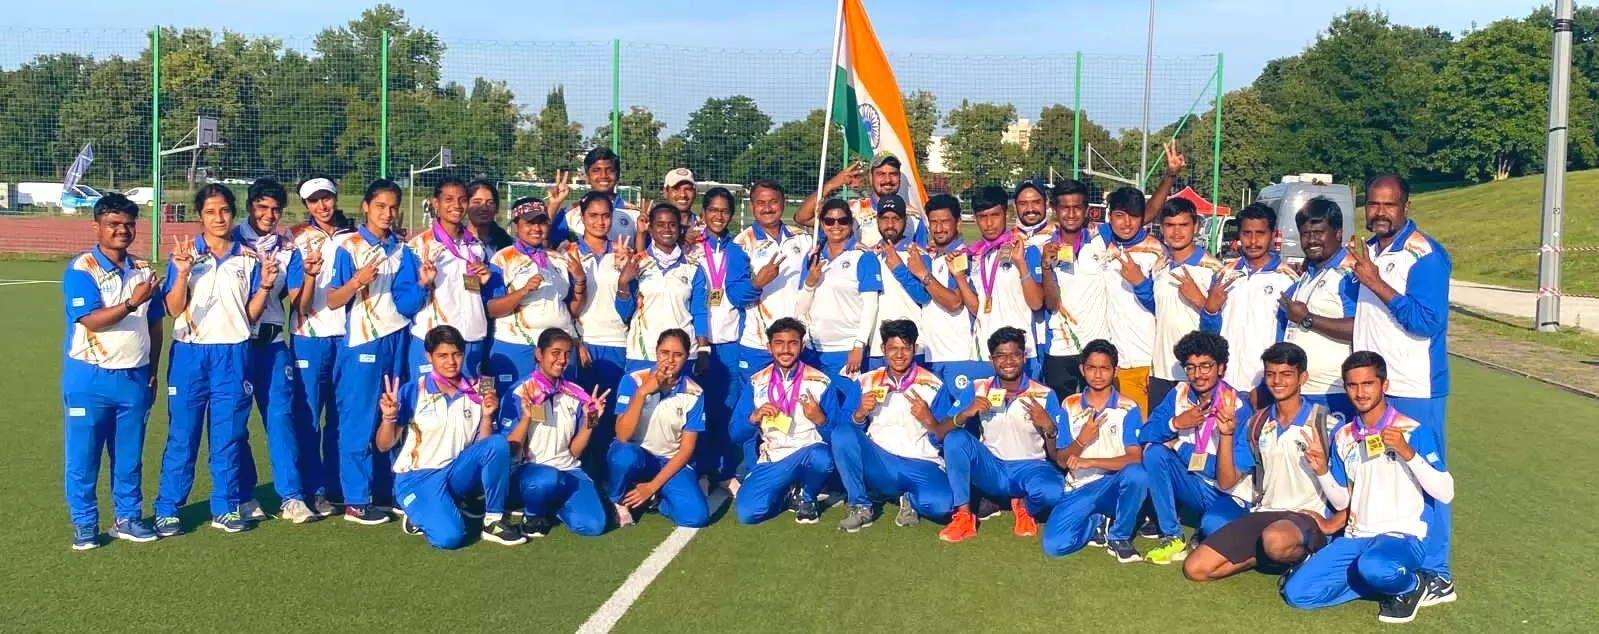 Indian archery team win 15 medals at world youth championships (Source: AAI/Twitter)